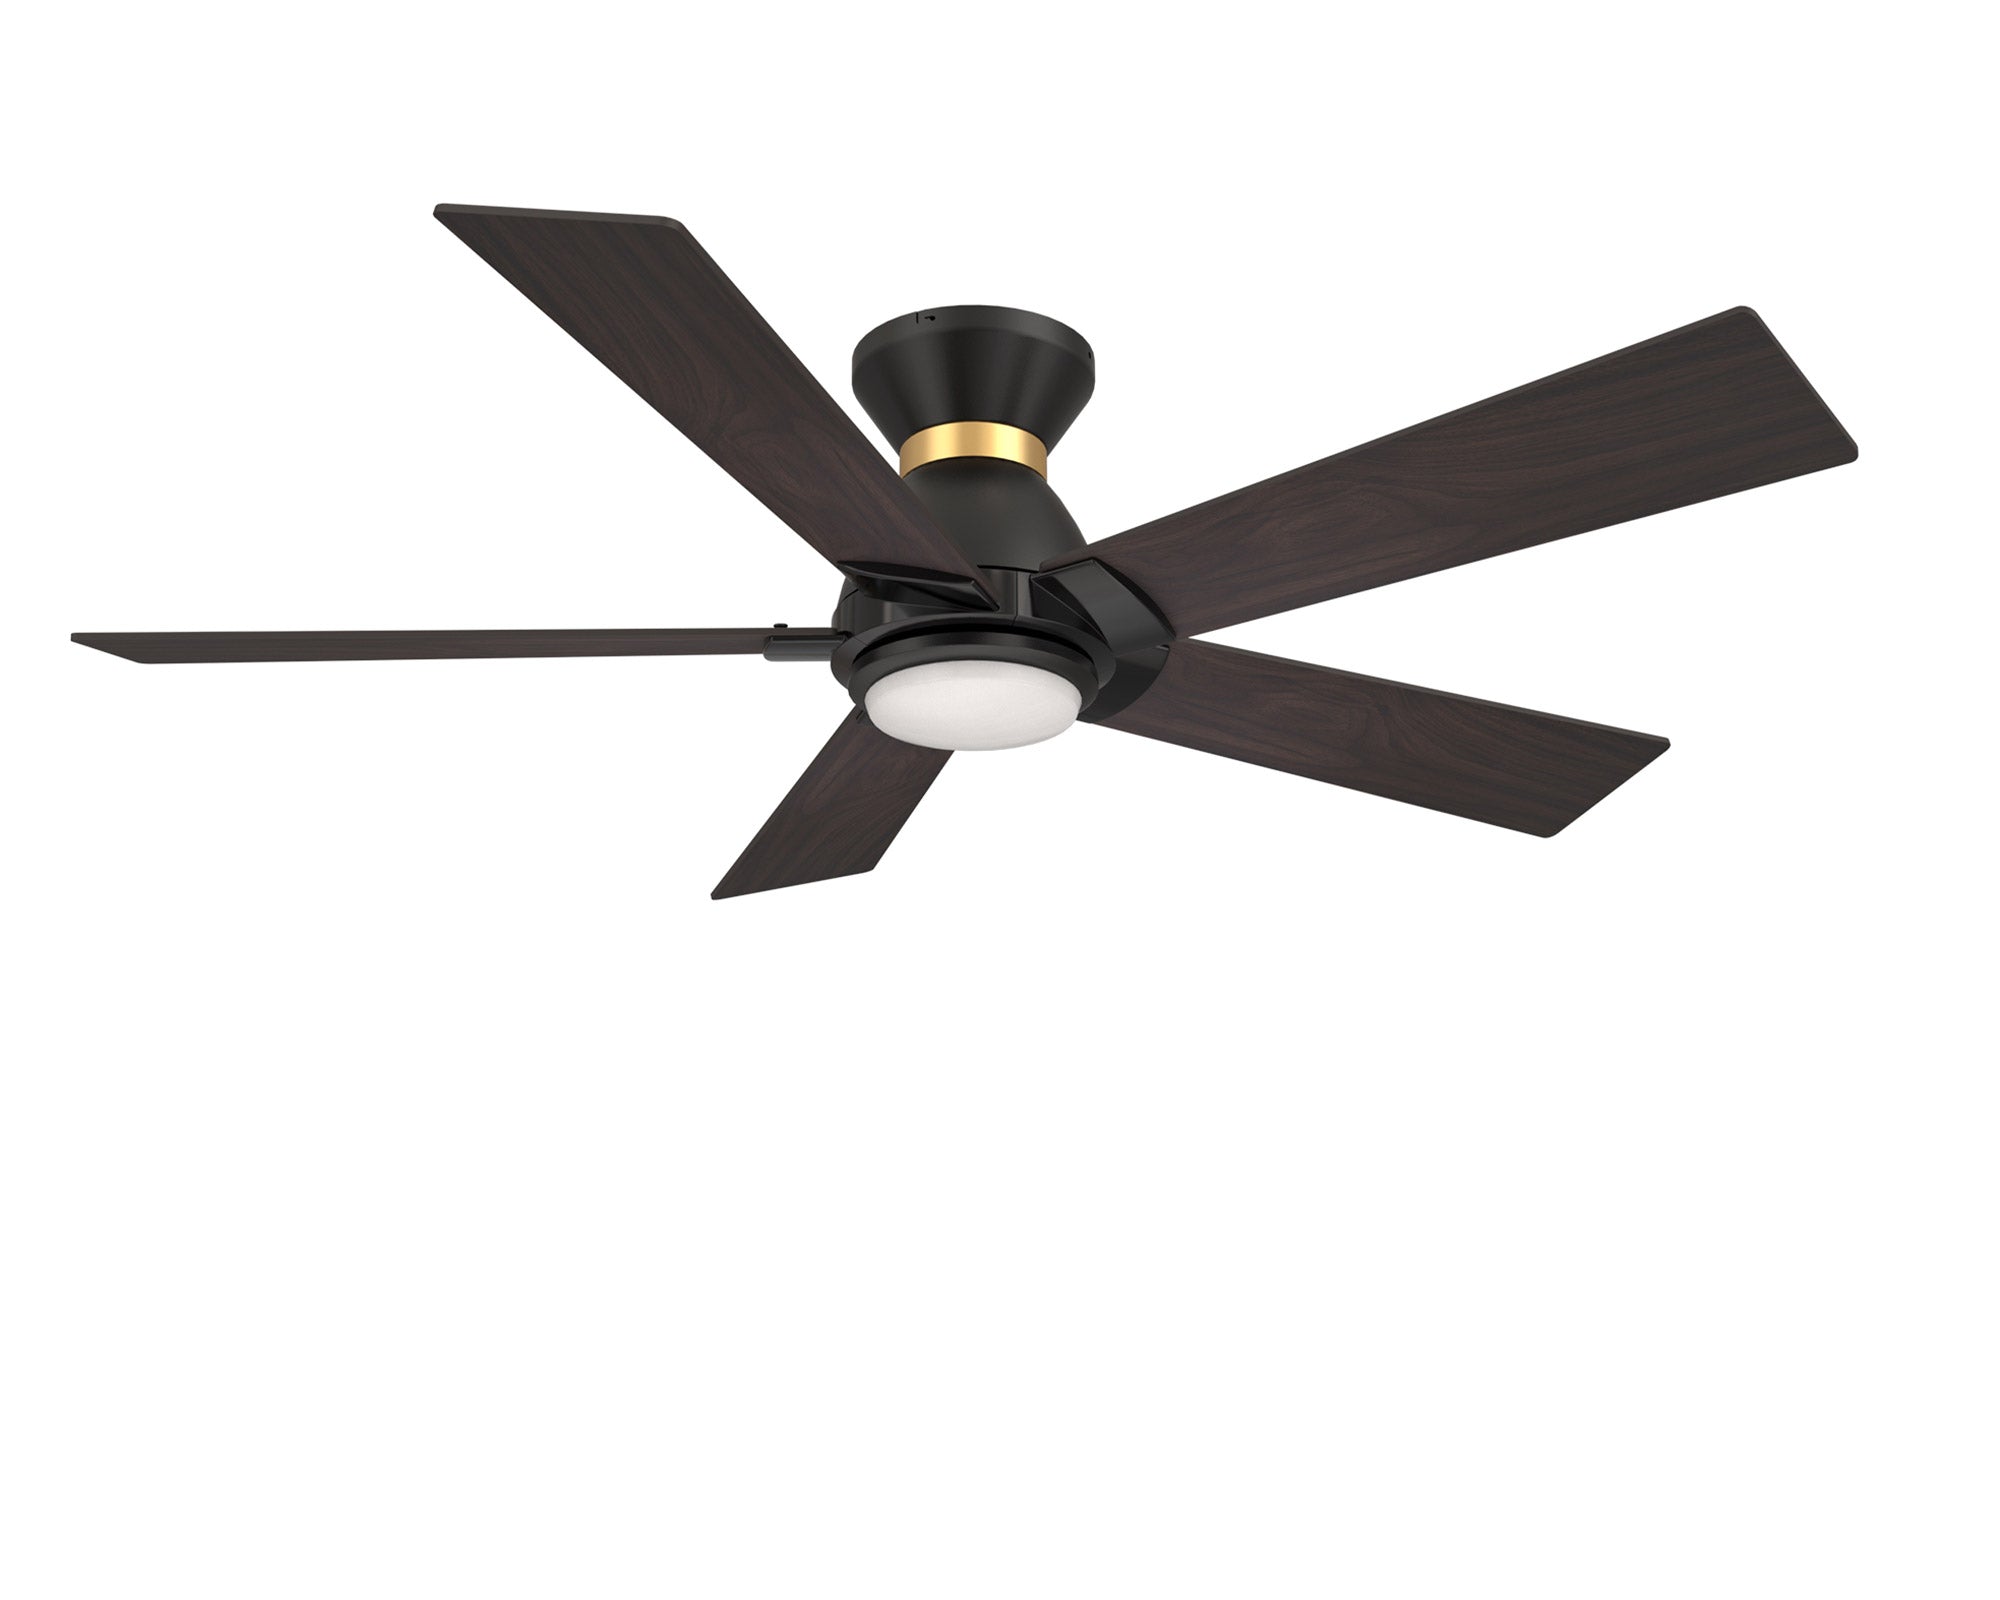 Smafan-Aspen-Indoor-Outdoor-Flush-Mount-Ceiling-Fan-with-Dimmable-LED-Light-48-52-PRE-ORDER